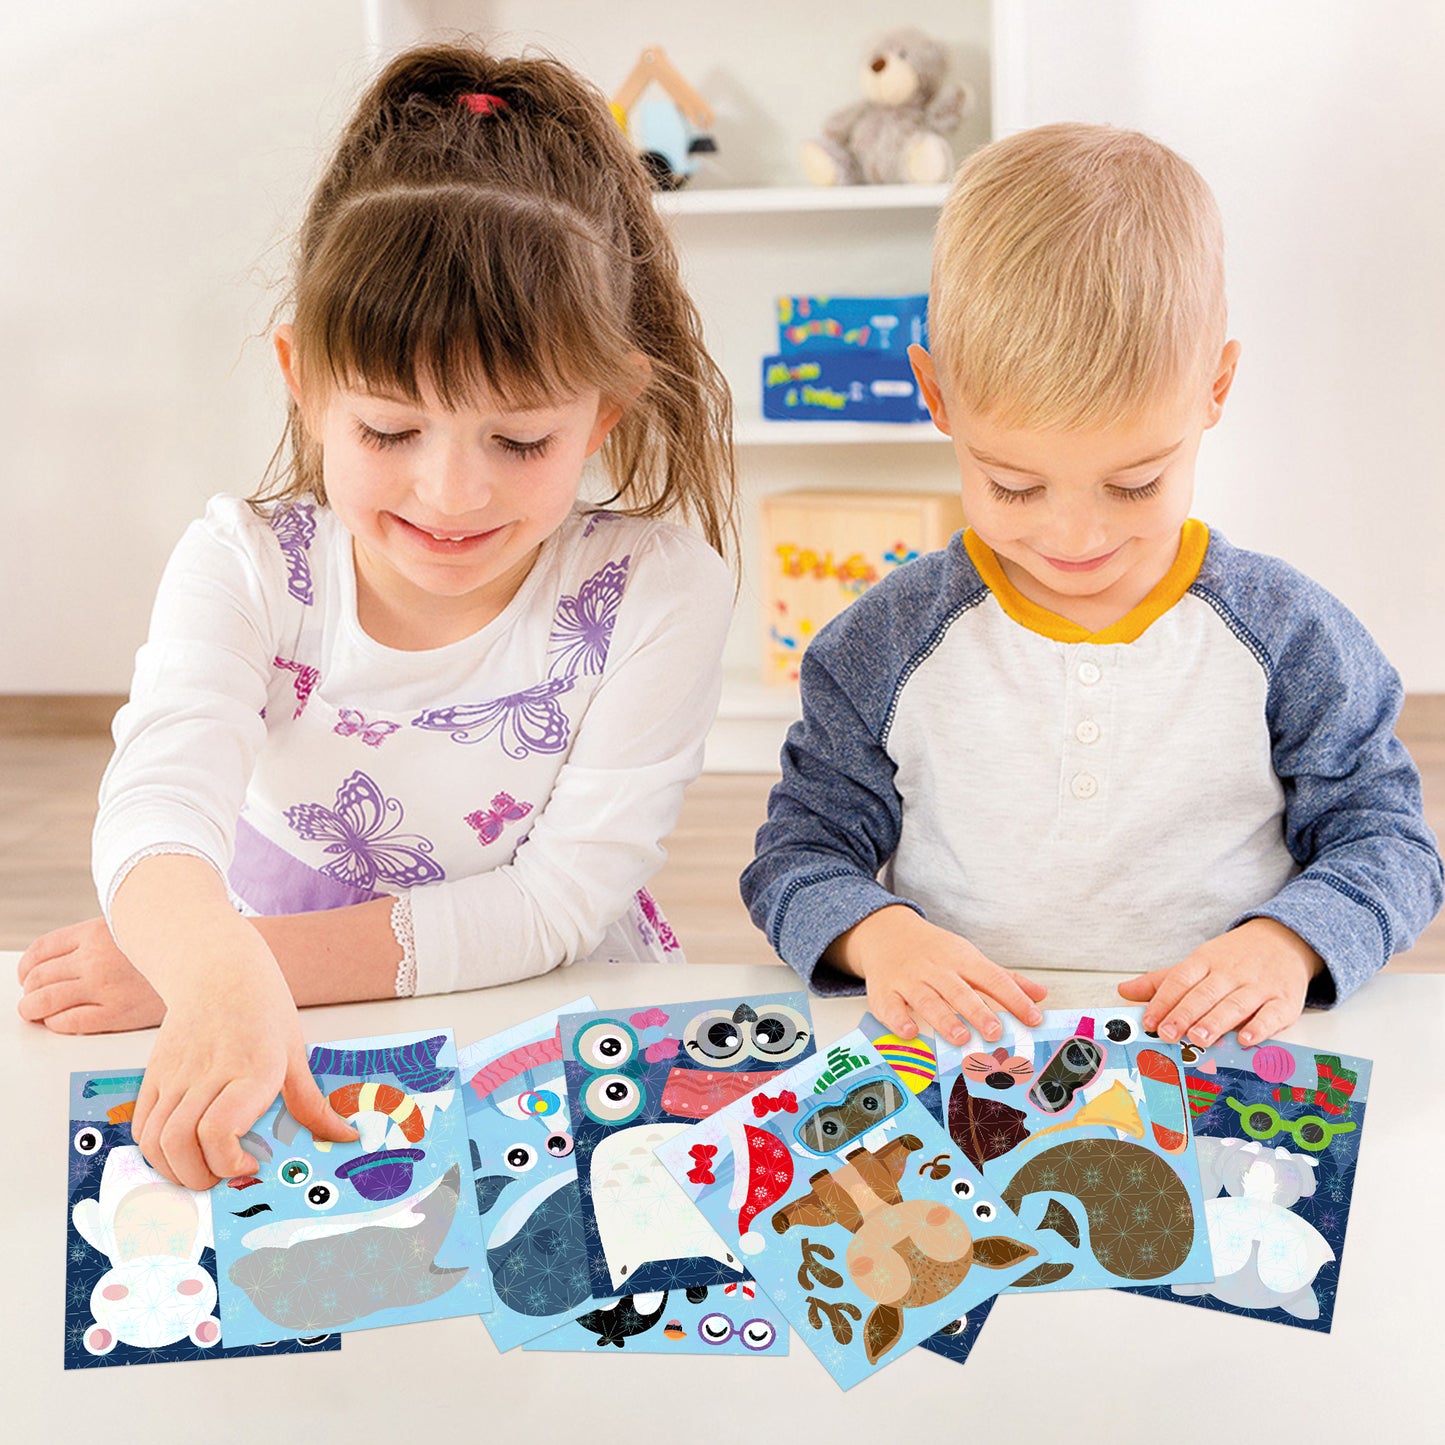 HubirdSall 45Pcs Polar Animals Make-a-Face Holographic Sticker Make Your Own Arctic Animals Stickers Sheets with Polar Bear Snowy Arctic Fox Birthday Gift Party Favors Game School Activity for Kids